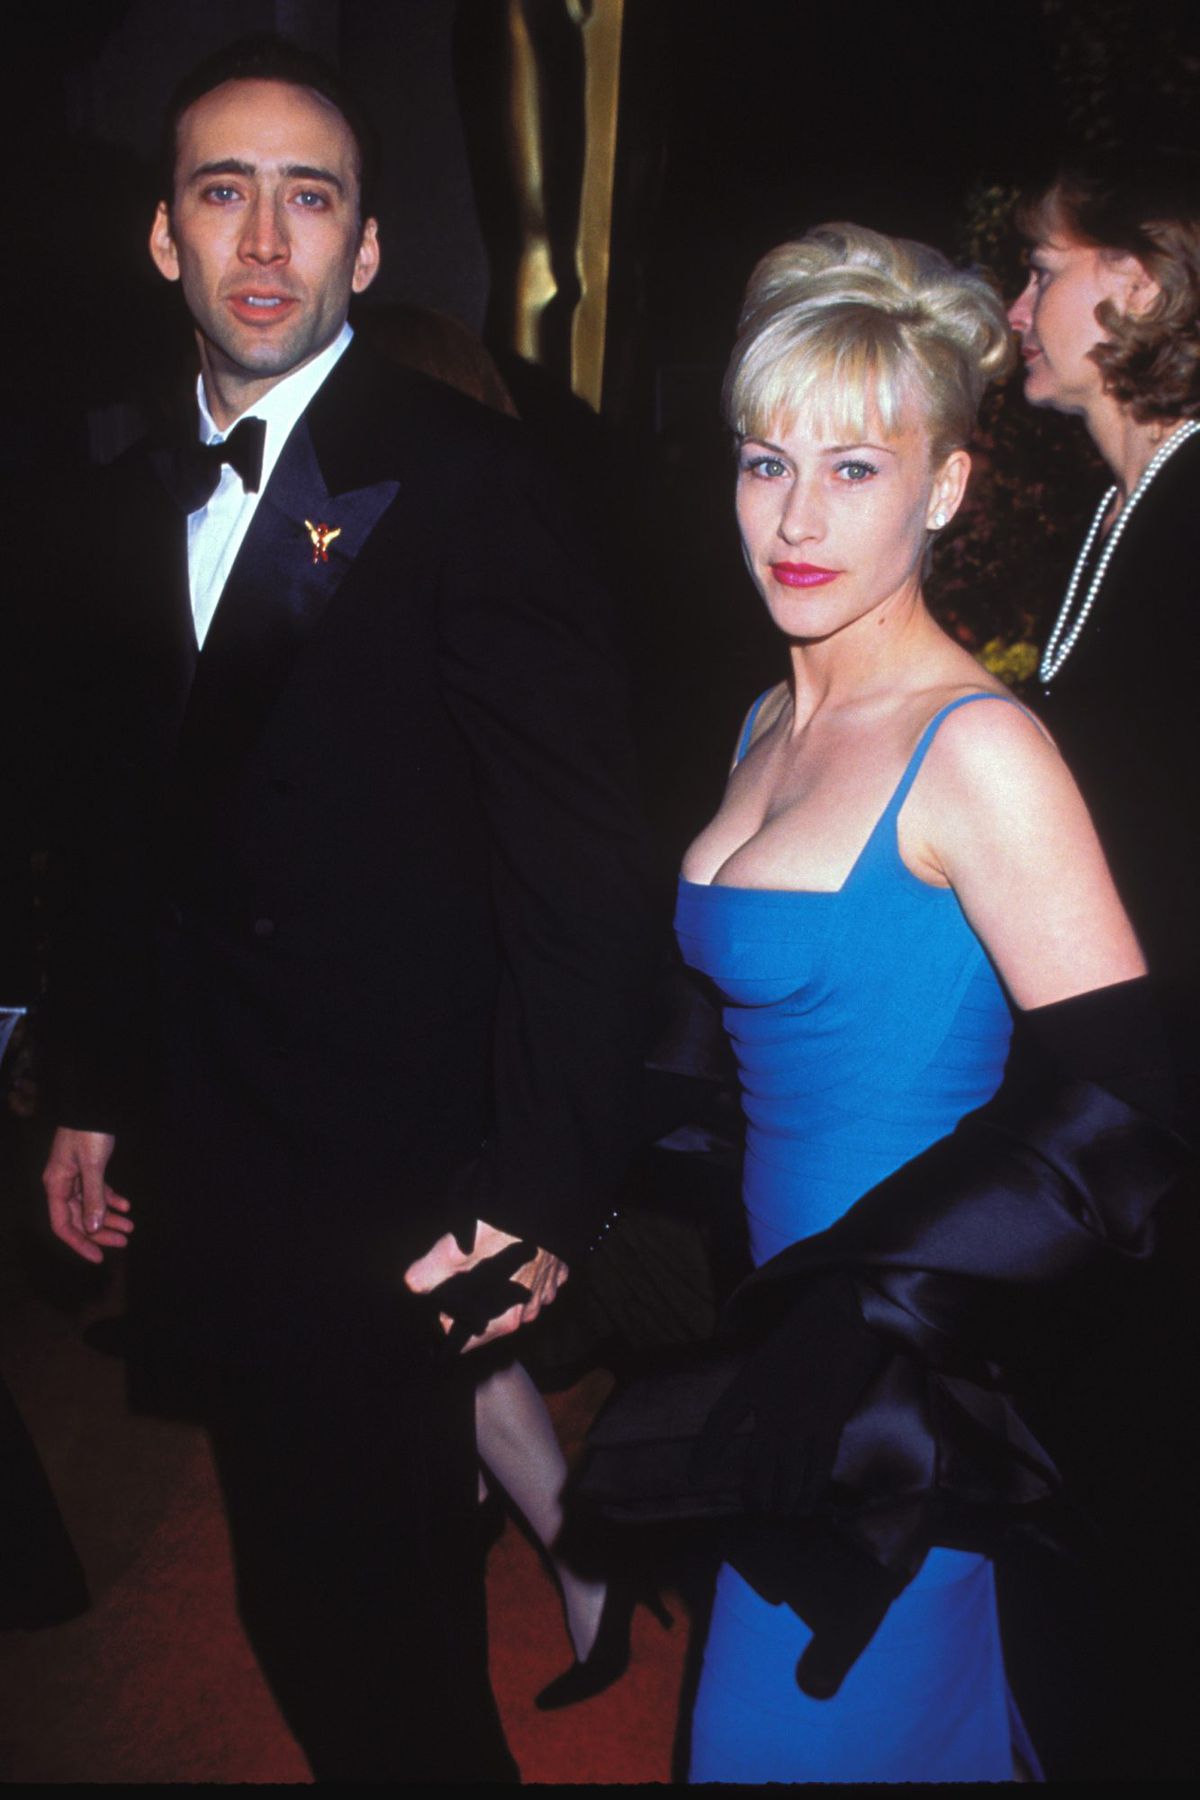 Nicholas Cage and Patricia Arquette arriving at the 68th Annual Academy Awards in LA, 03/25/1996